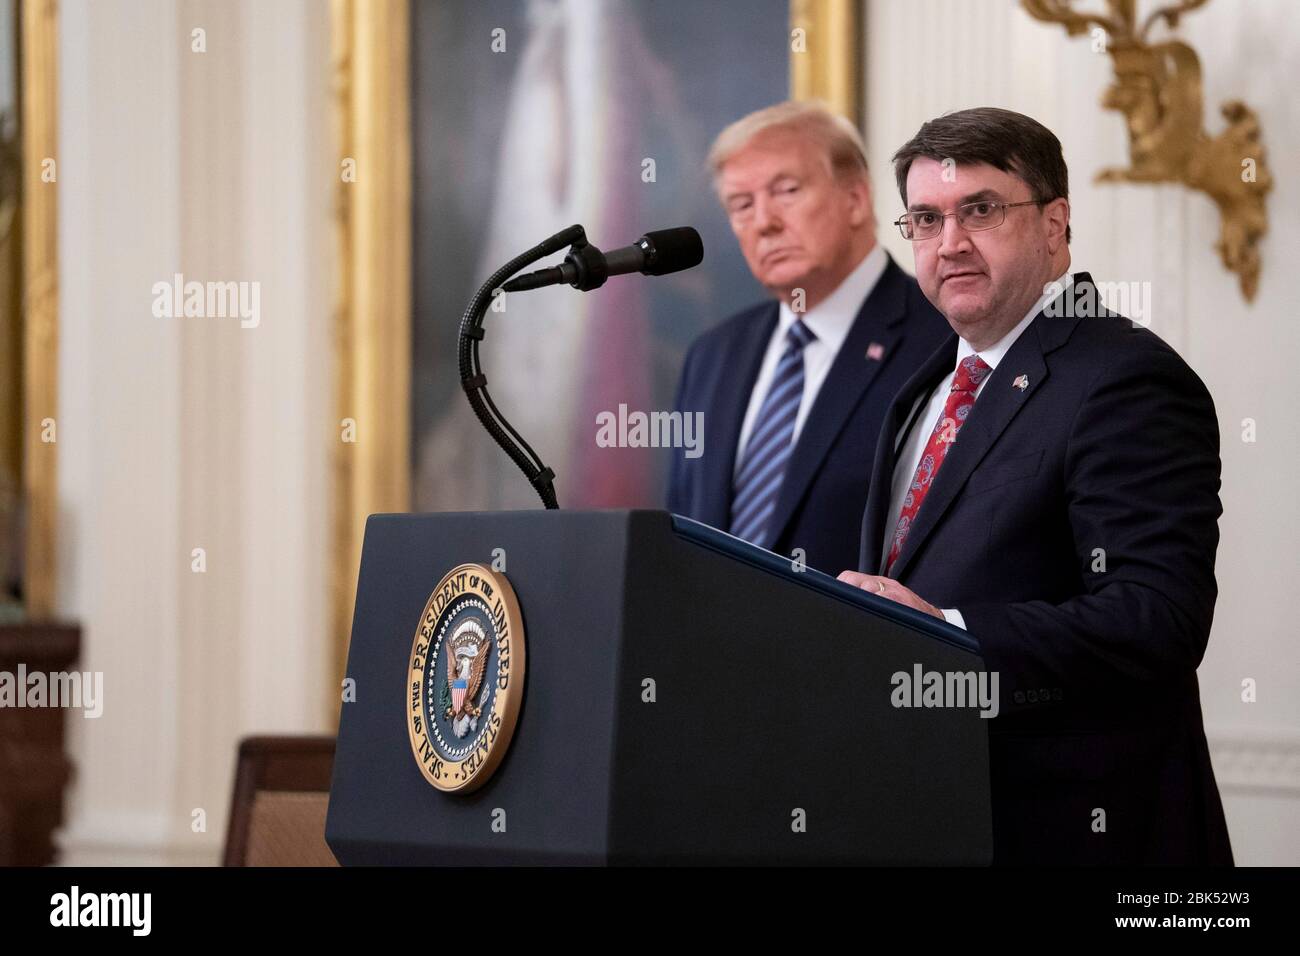 Washington, United States Of America. 30th Apr, 2020. Washington, United States of America. 30 April, 2020. U.S. President Donald Trump, listens as Secretary of Veterans Affairs Robert Wilkie addresses remarks at the protecting American Seniors event in the East Room of the White House April 30, 2020 in Washington, DC. Credit: Tia Dufour/White House Photo/Alamy Live News Stock Photo